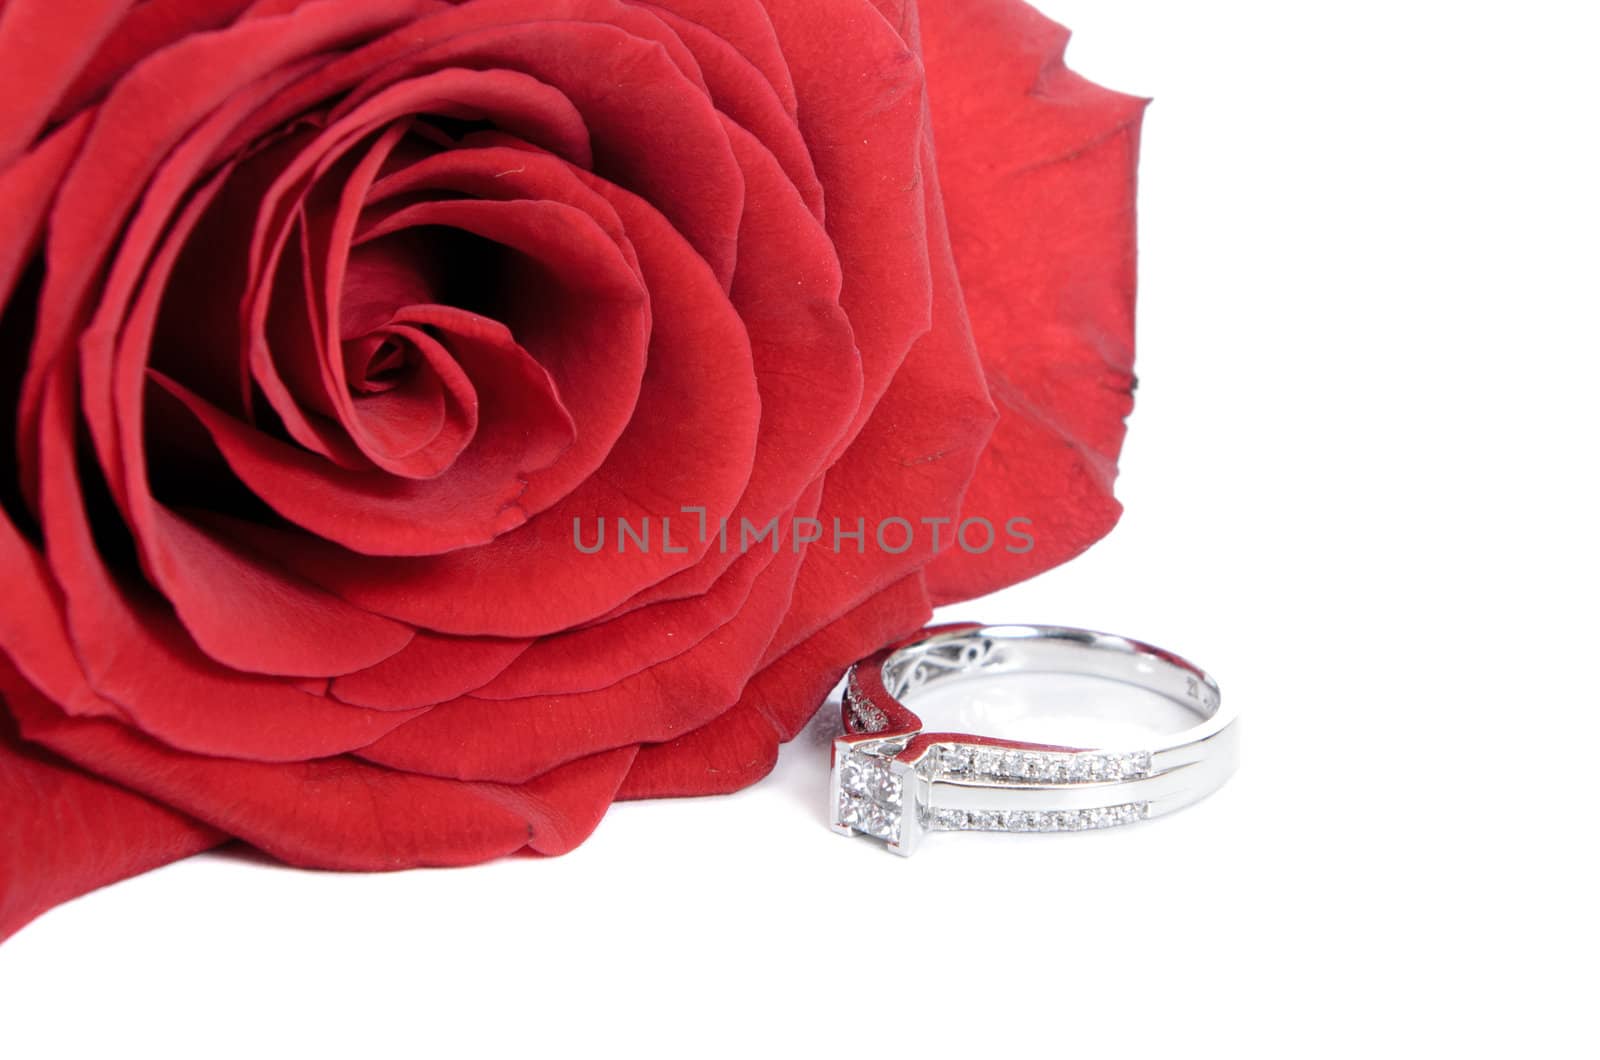 Diamond engagement ring and a red rose, isolated on a white background.